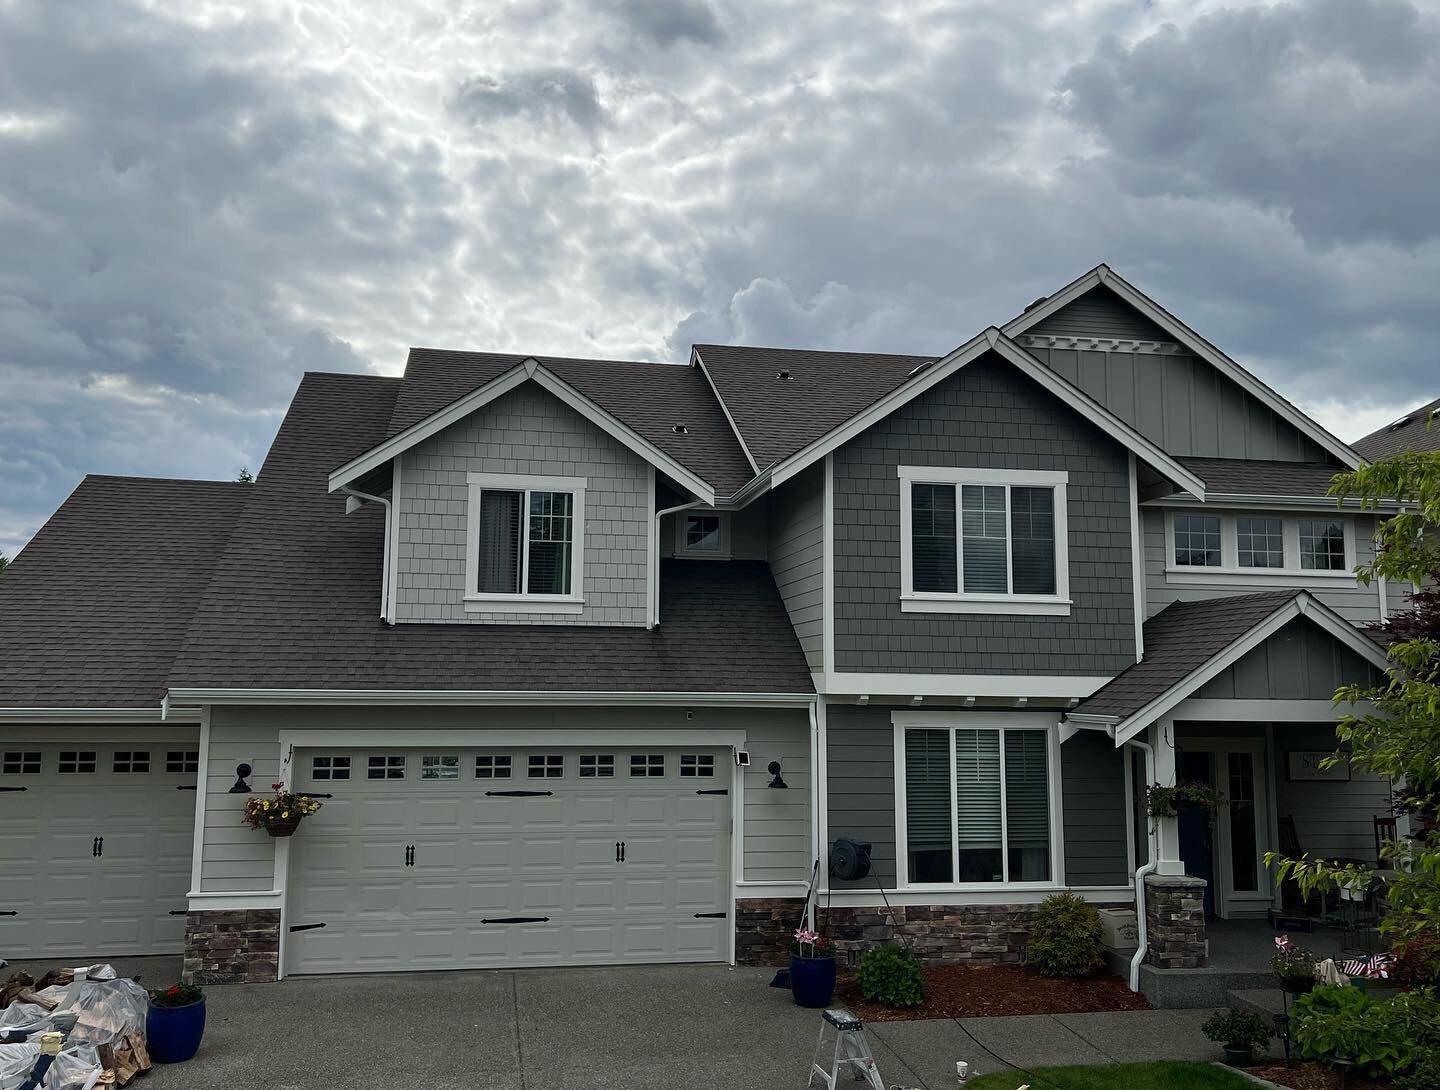 Finished this bad boy up today! 

The rain can&rsquo;t stop impact from getting the job done!

#exterior #exteriorpainting #exteriorpainters #benjaminmoore #titan440 #homeimprovement #puyalluppainter #tacomapainter #gigharborpainter